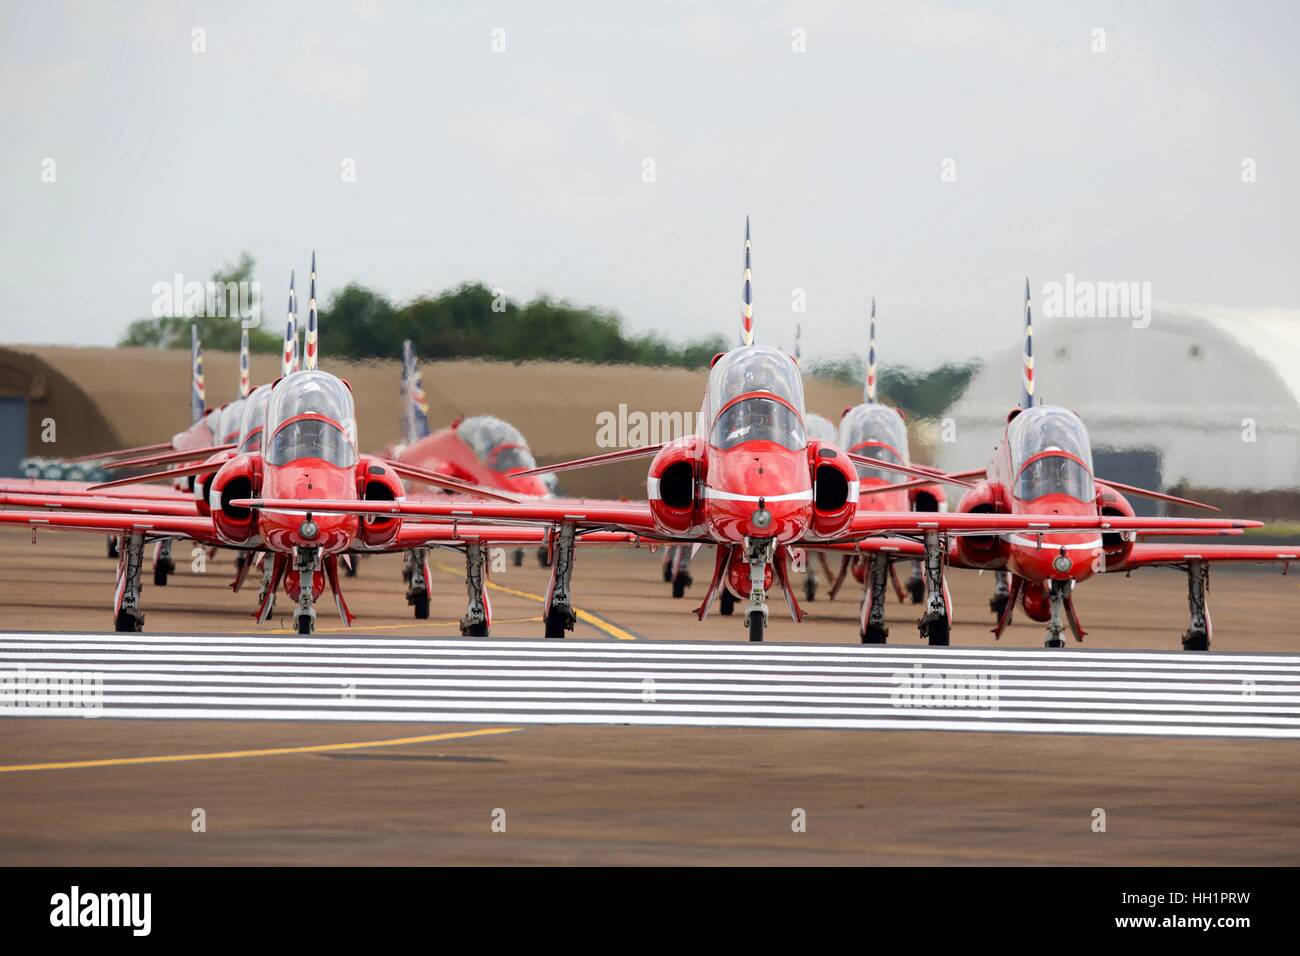 The Royal Air Force Red Arrows aerobatic team taxiing on the runway at RAF Fairford Stock Photo